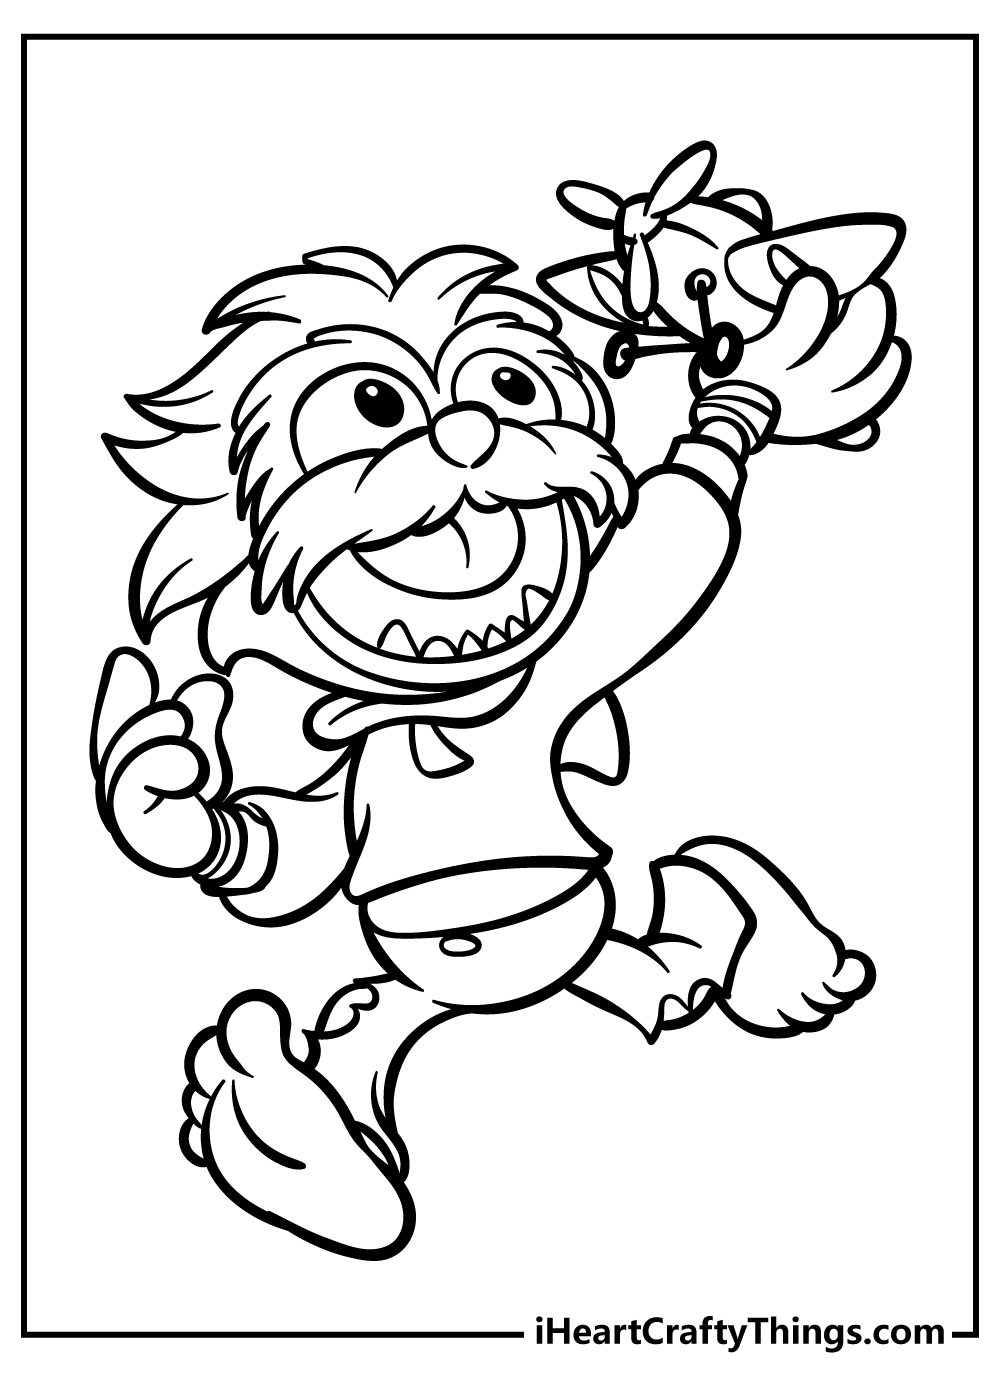 Muppet Babies Coloring Pages free pdf download